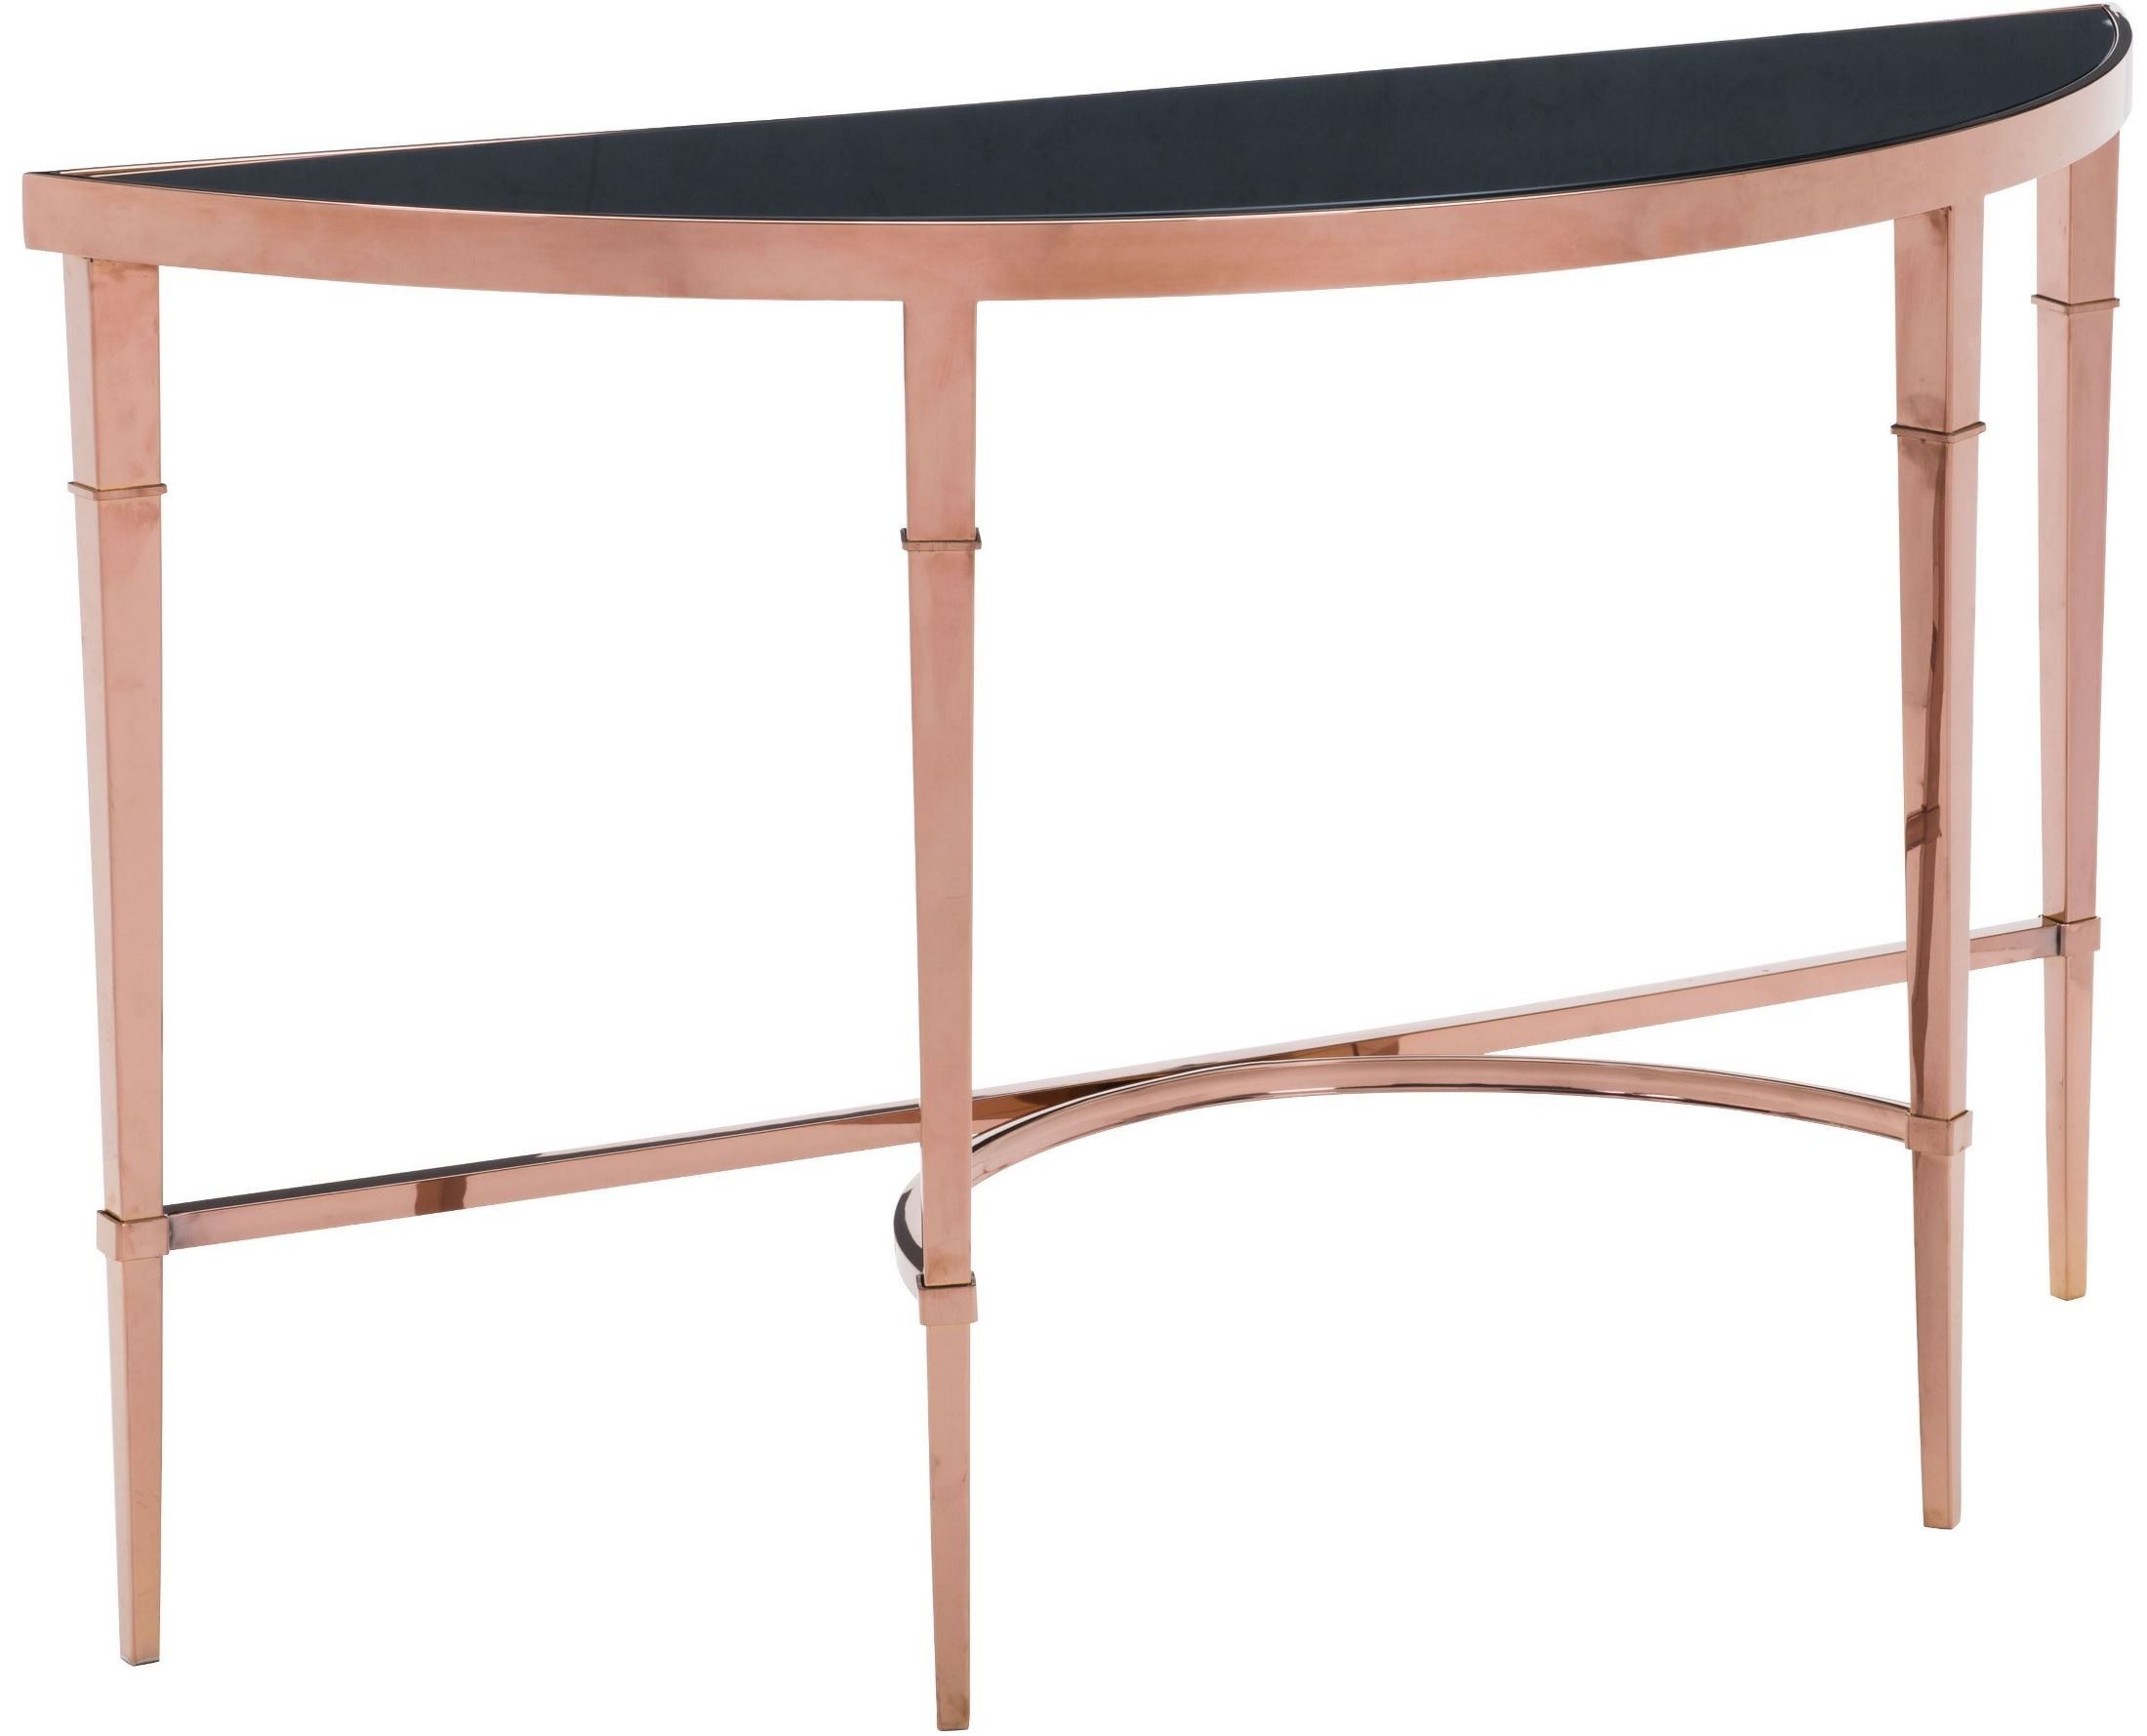 Elite Rose Gold & Black Console Table From Zuo Mod (100348) | Coleman Intended For Black And Gold Console Tables (View 8 of 20)